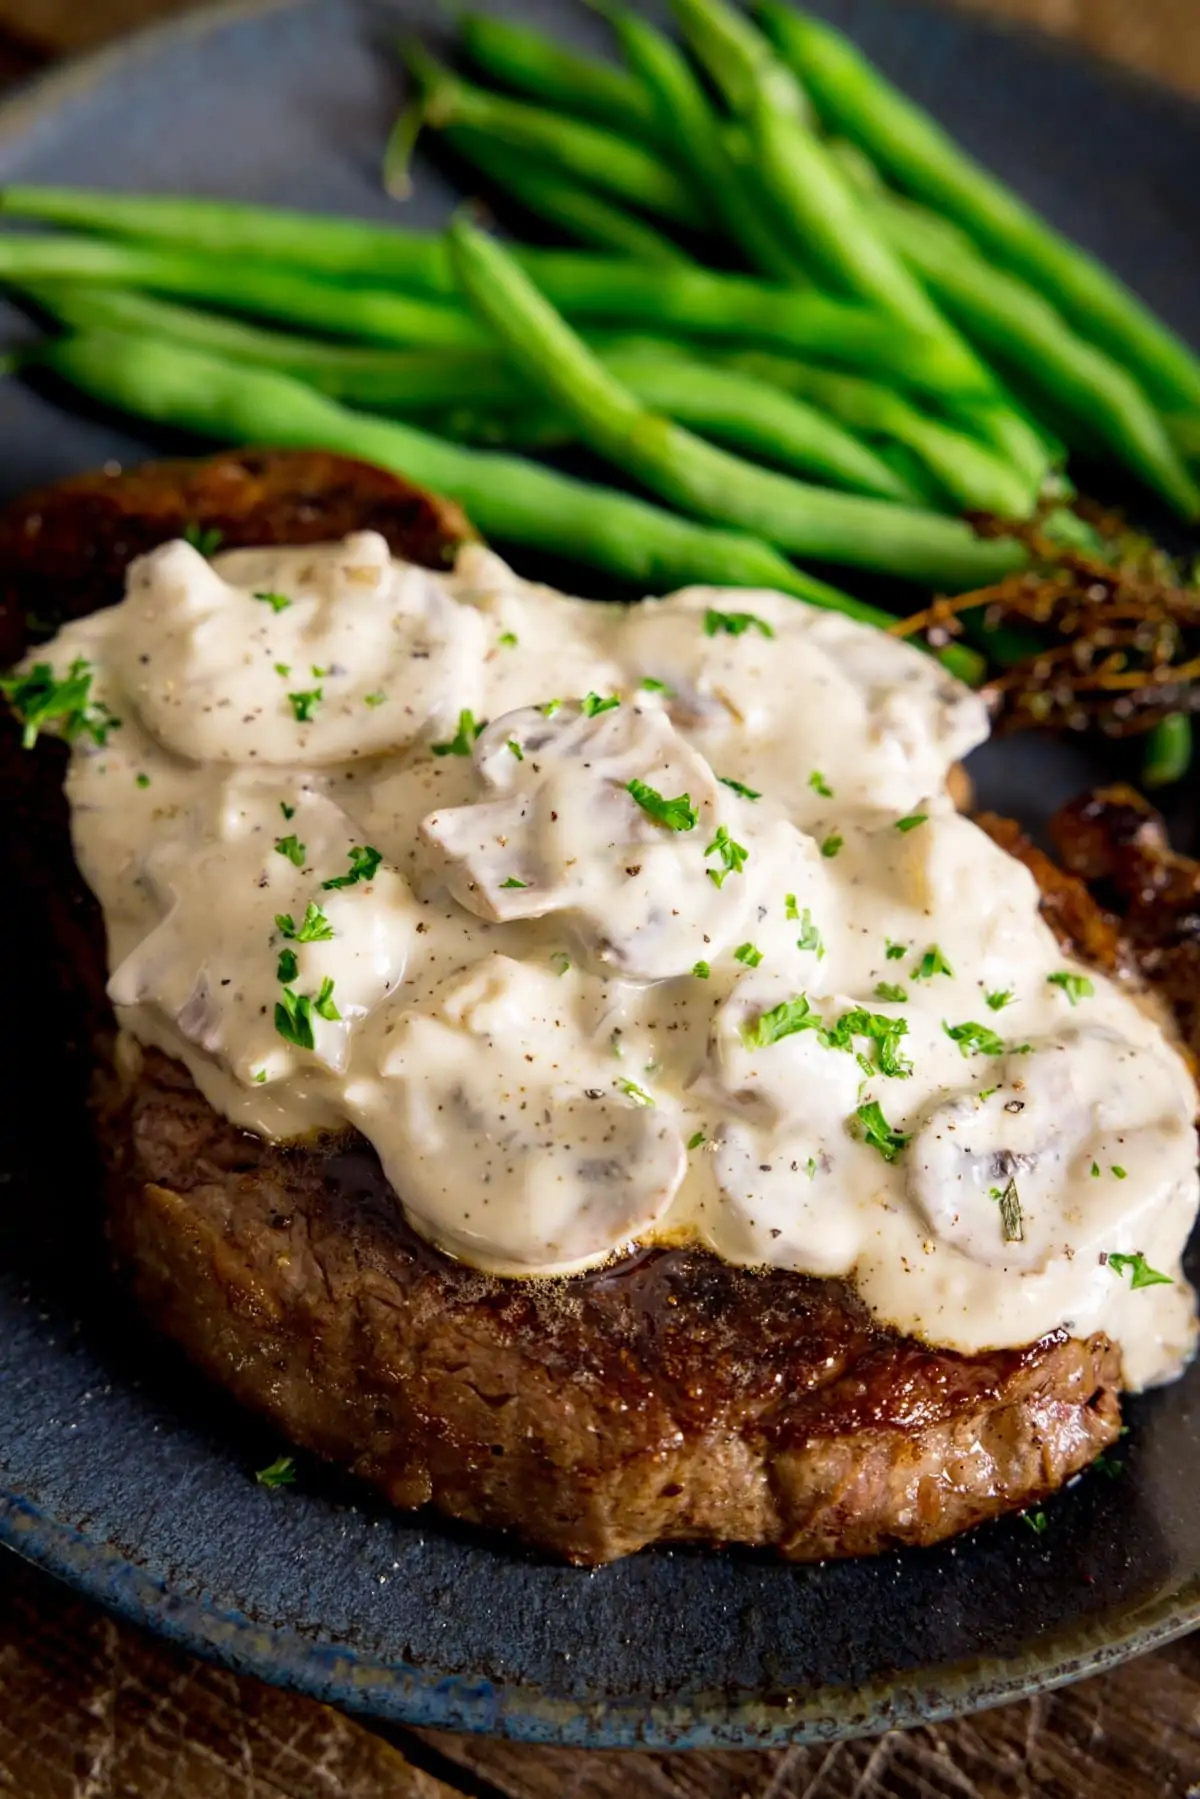 A blue plate with Creamy mushroom sauce on a cooked steak with green beans in the background